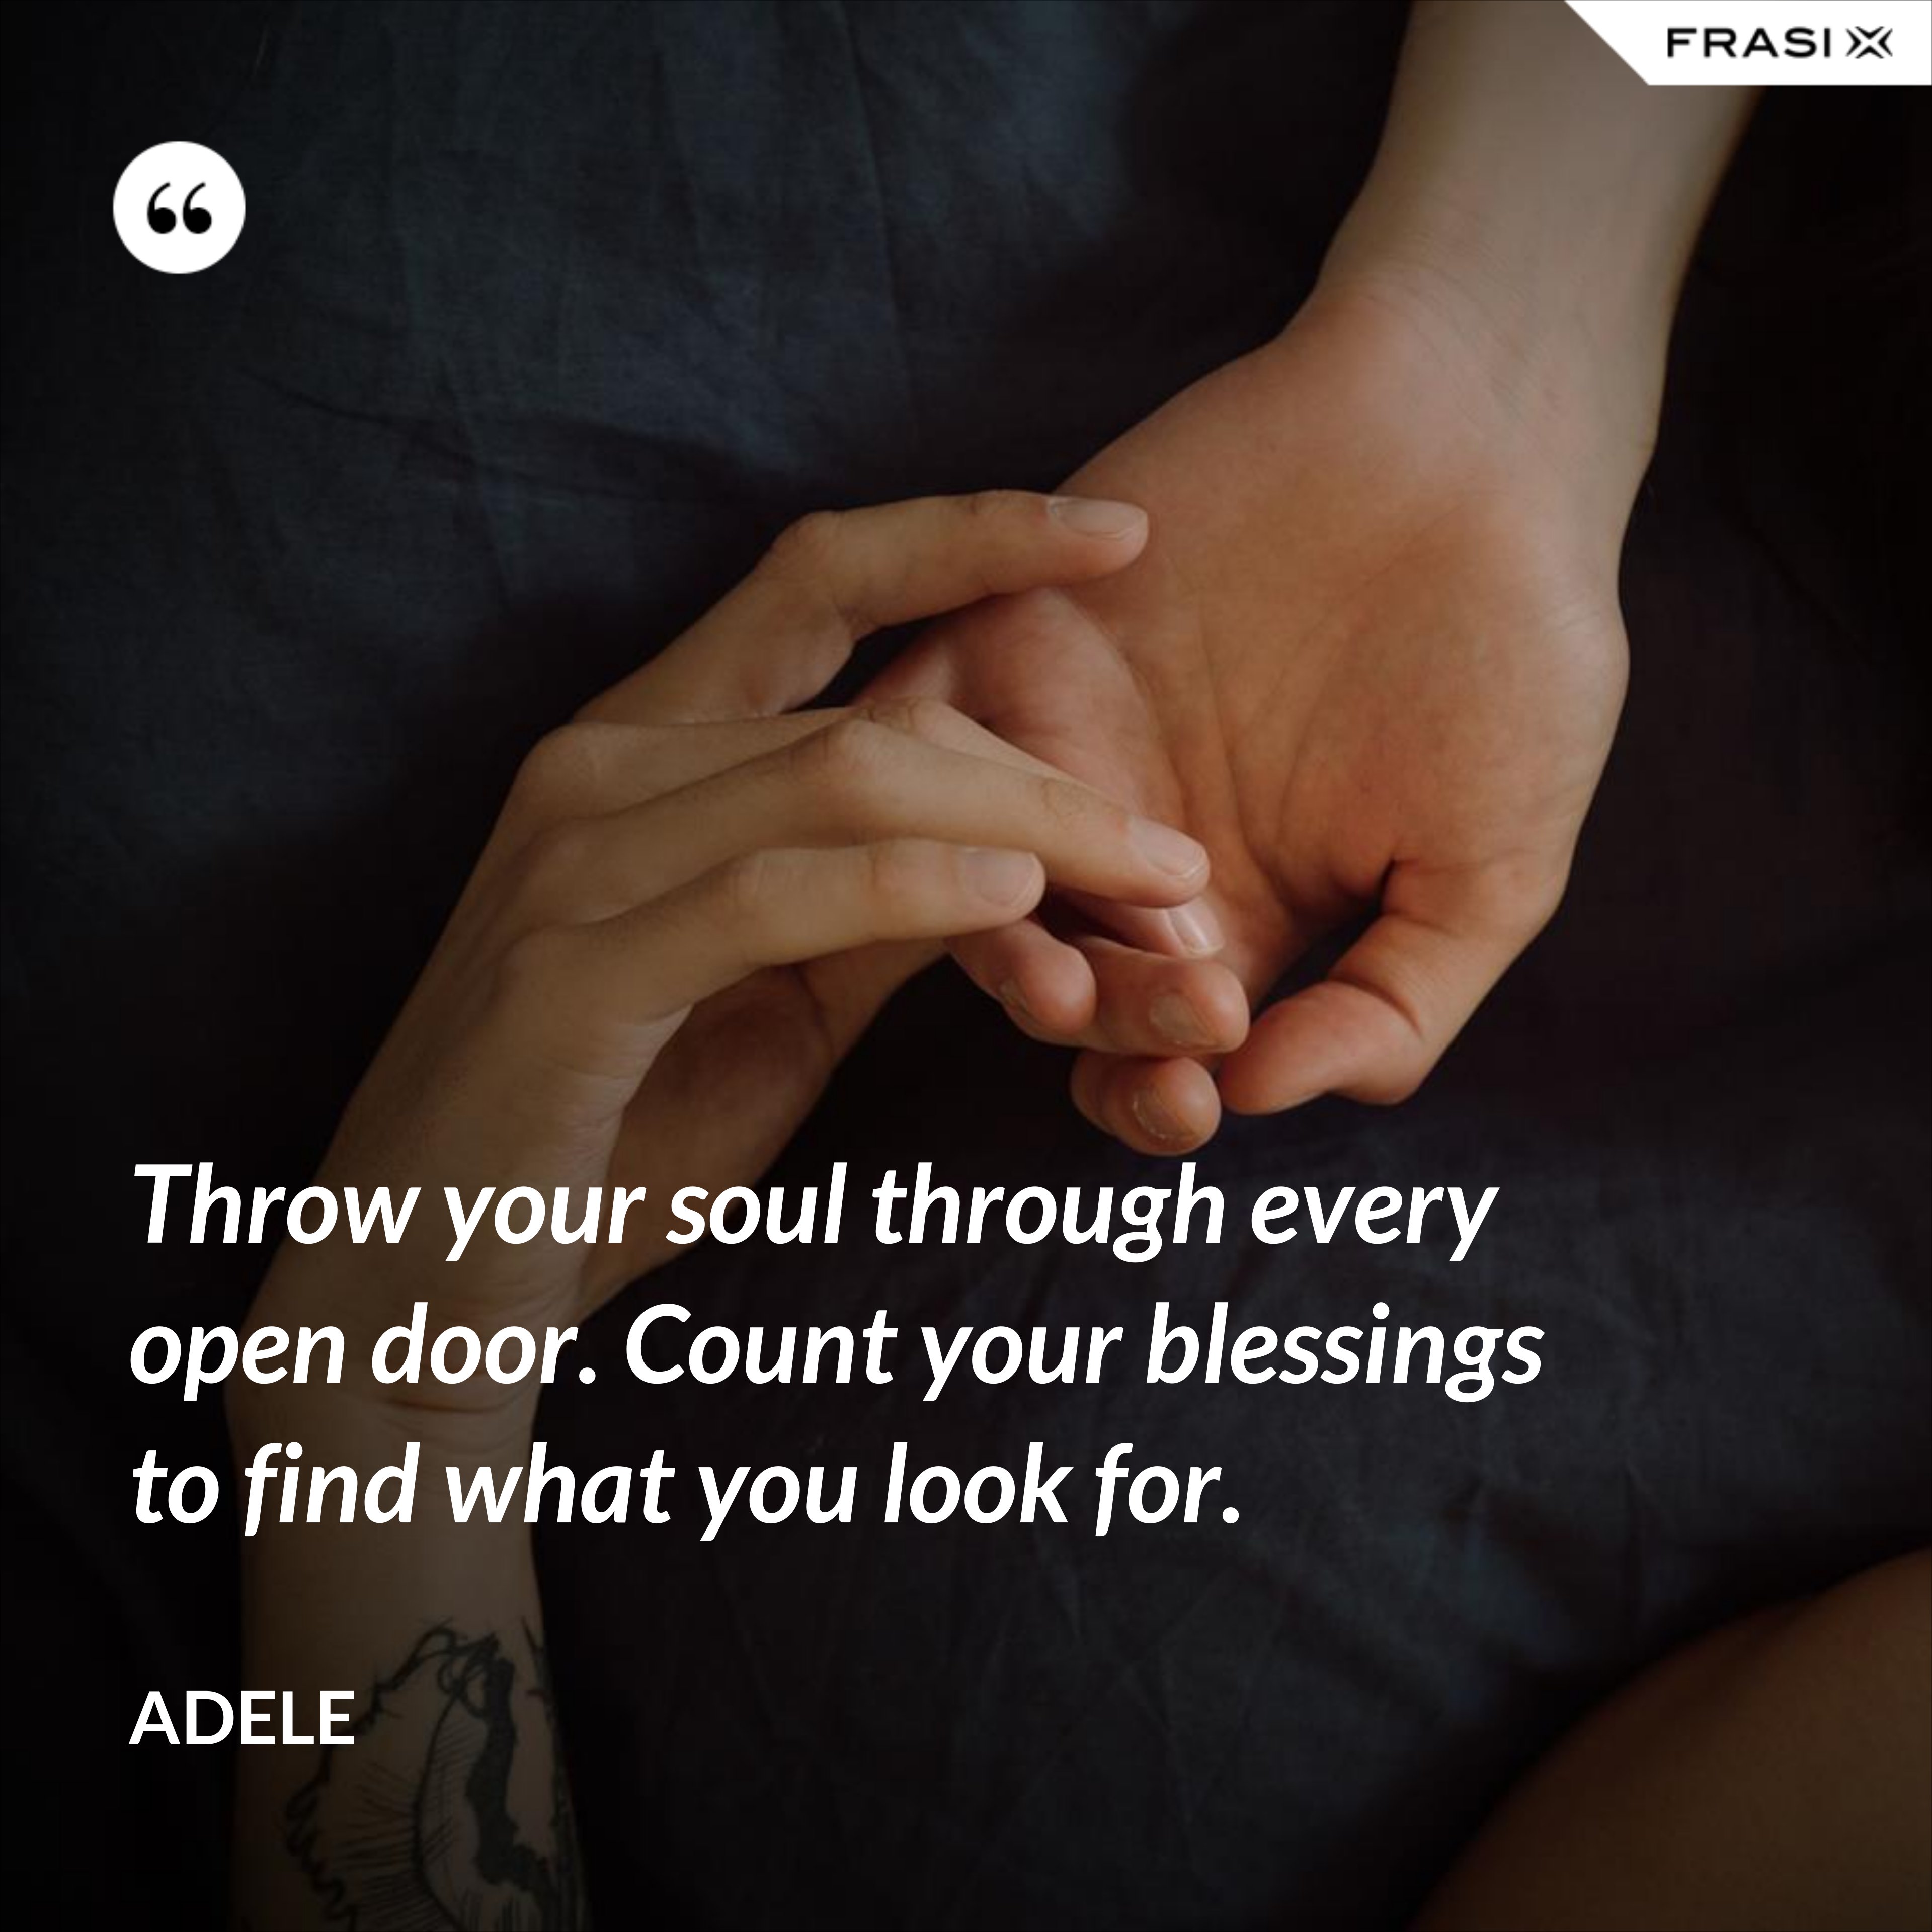 Throw your soul through every open door. Count your blessings to find what you look for. - Adele